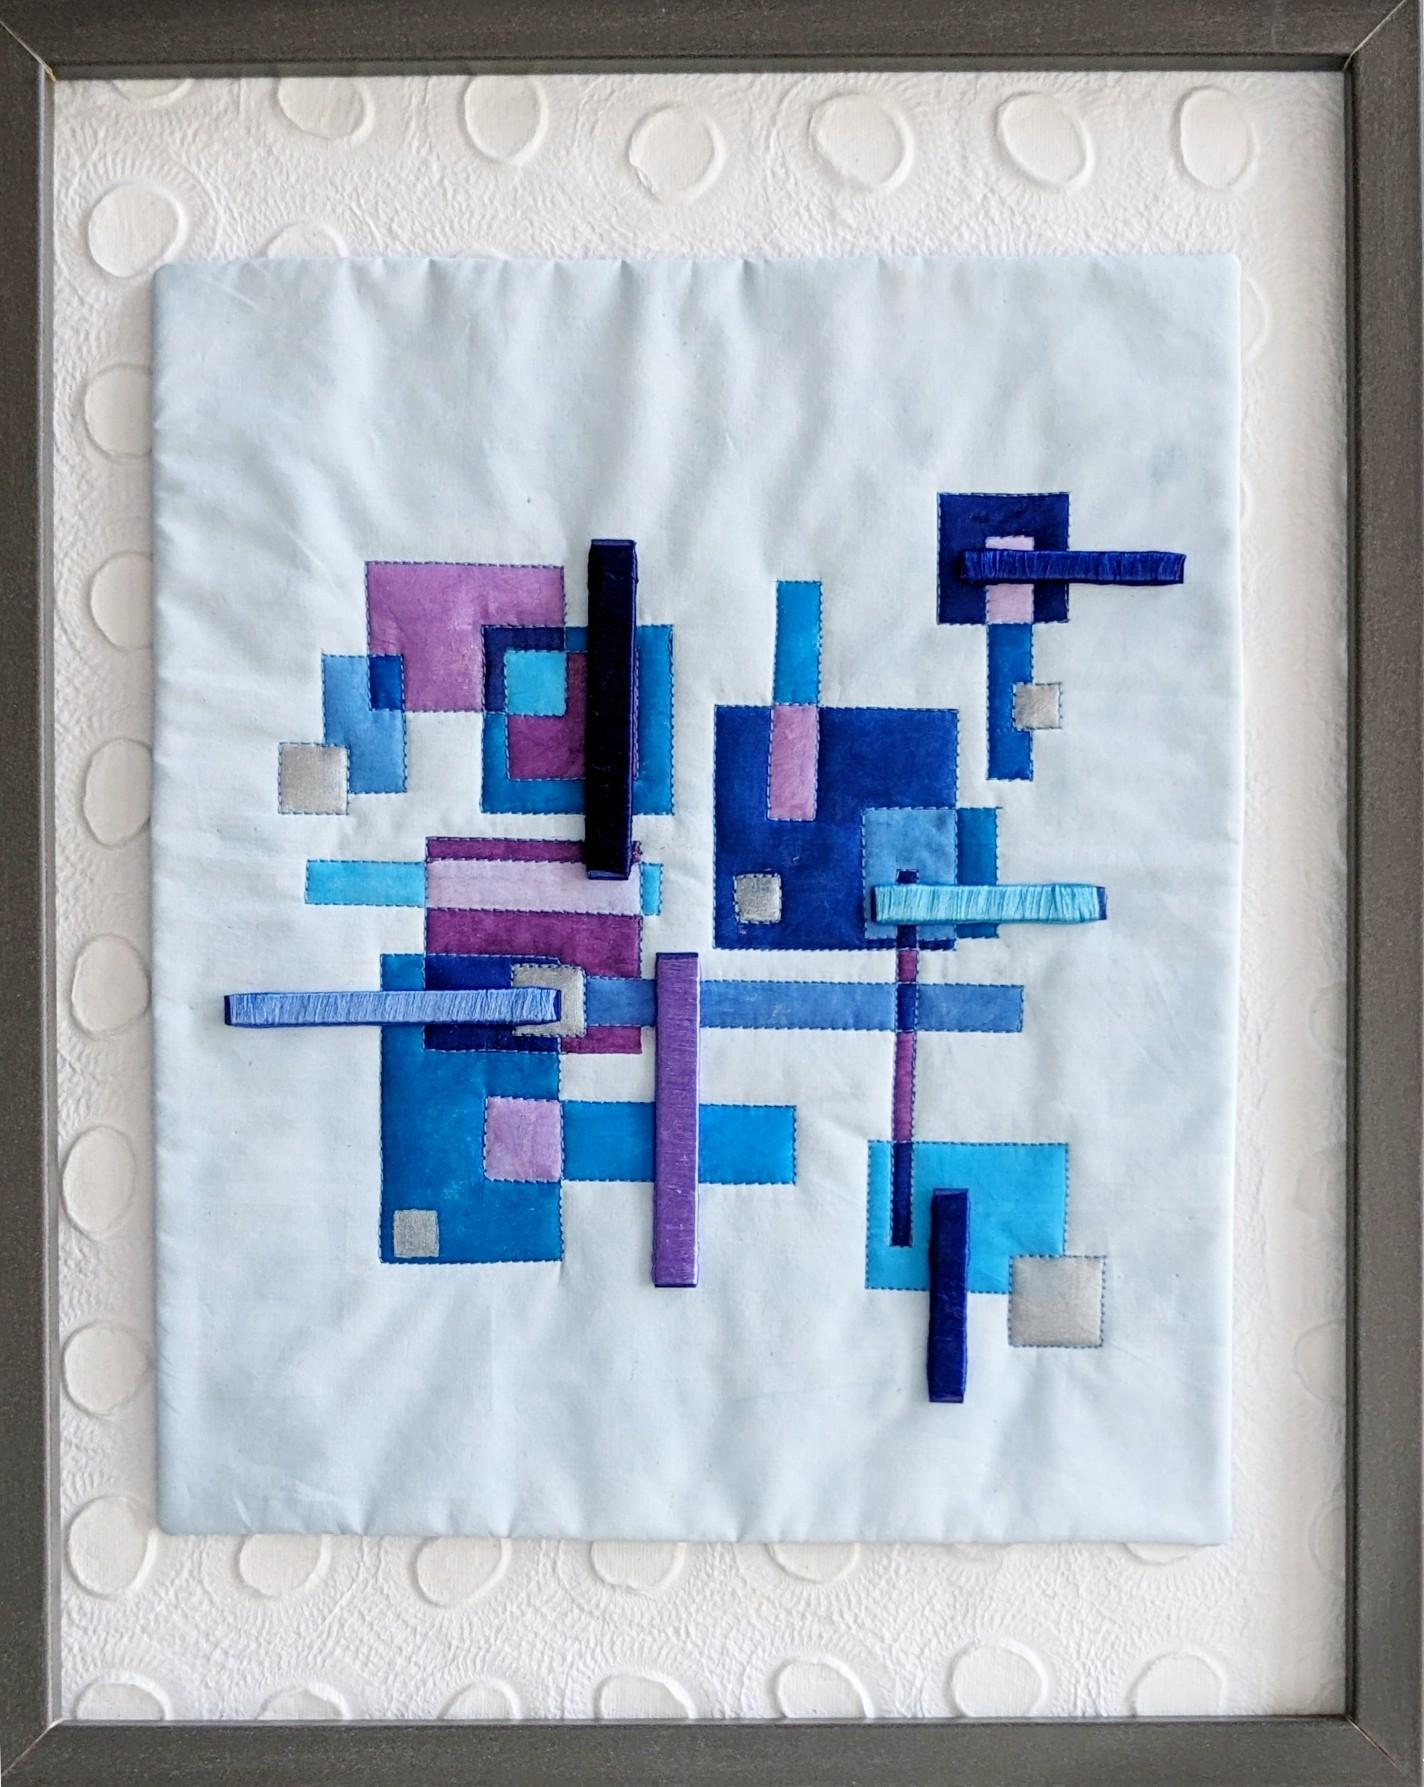 Paainted wholecloth quilt with machine stitching and shapes wrapped in silk thread.  31 x 38cm